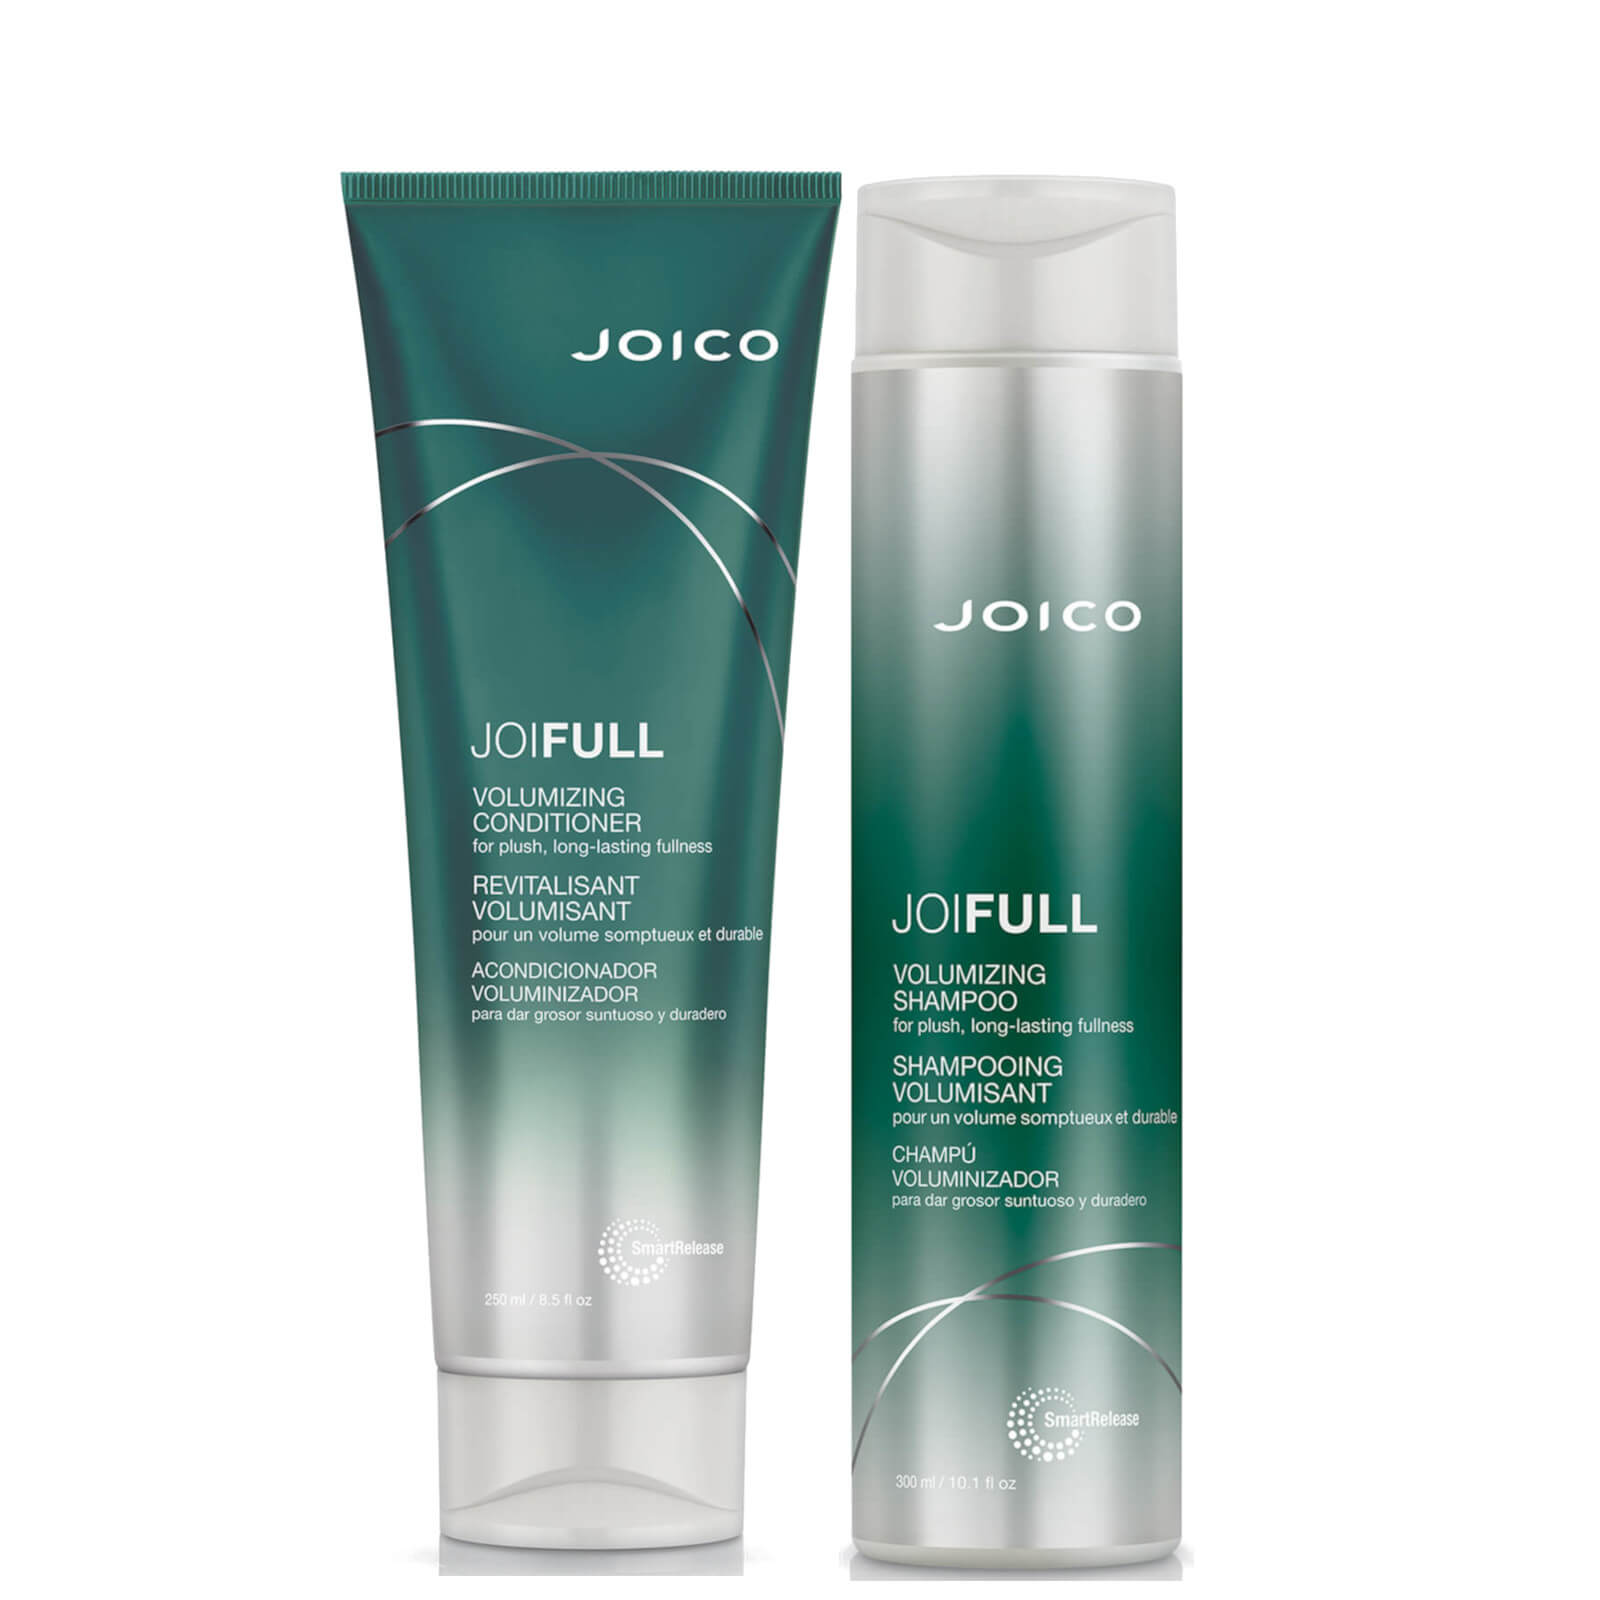 Photos - Hair Product Joico JoiFull Volume Shampoo and Conditioner JIC-VOL2 